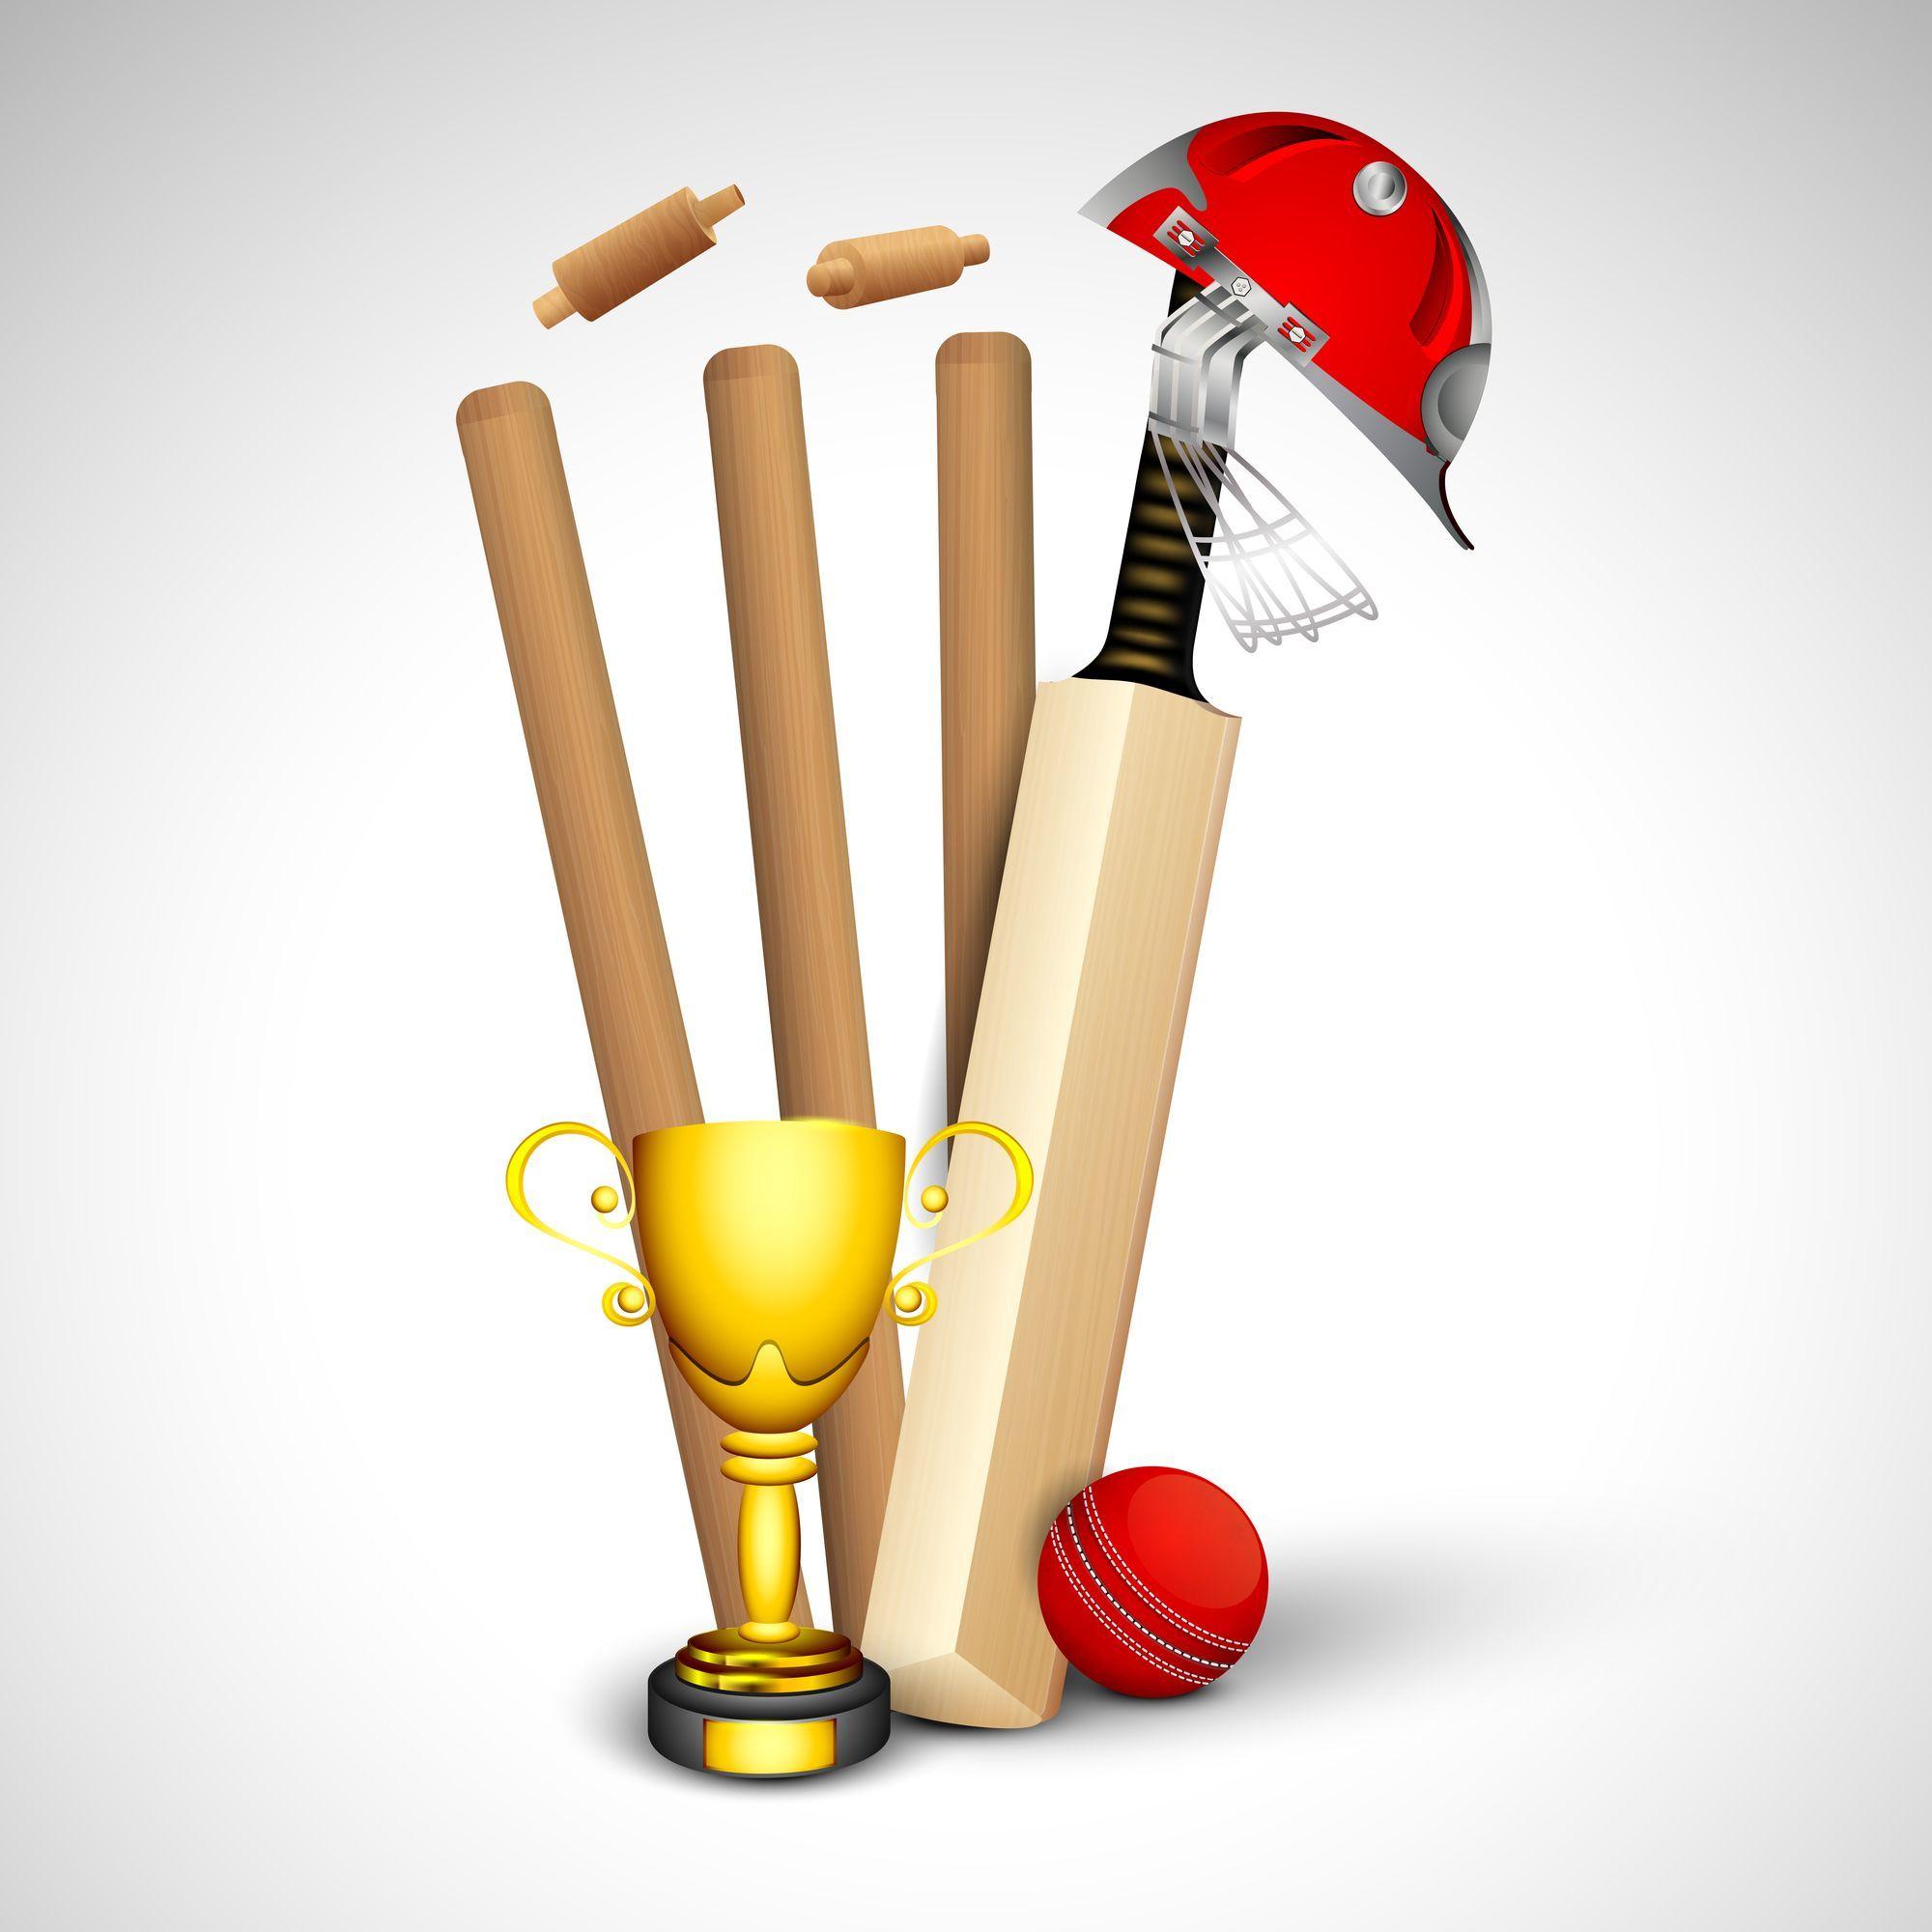 Cricket Bat Logo - Abstract sports concept with cricket ball on wicket stumps